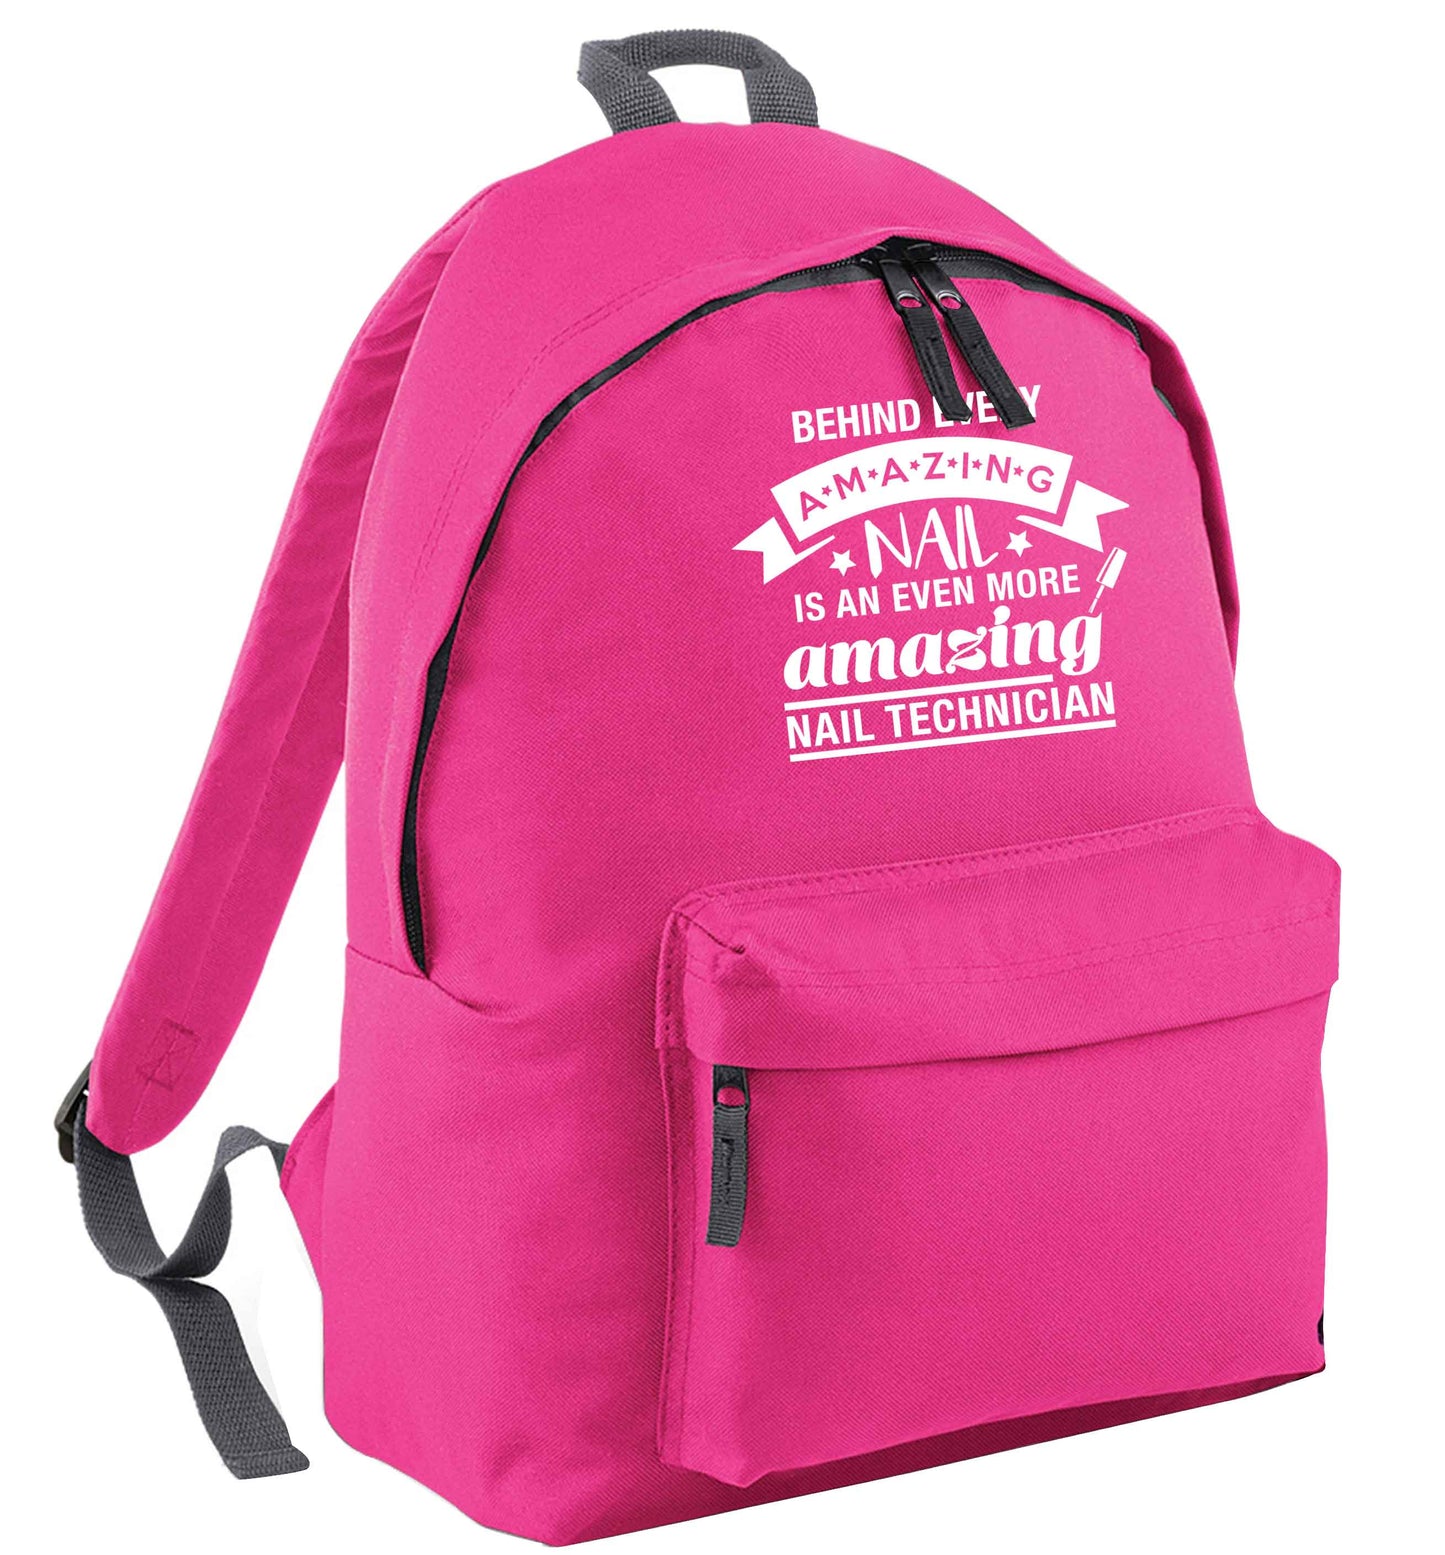 Behind every amazing nail is an even more amazing nail technician pink adults backpack